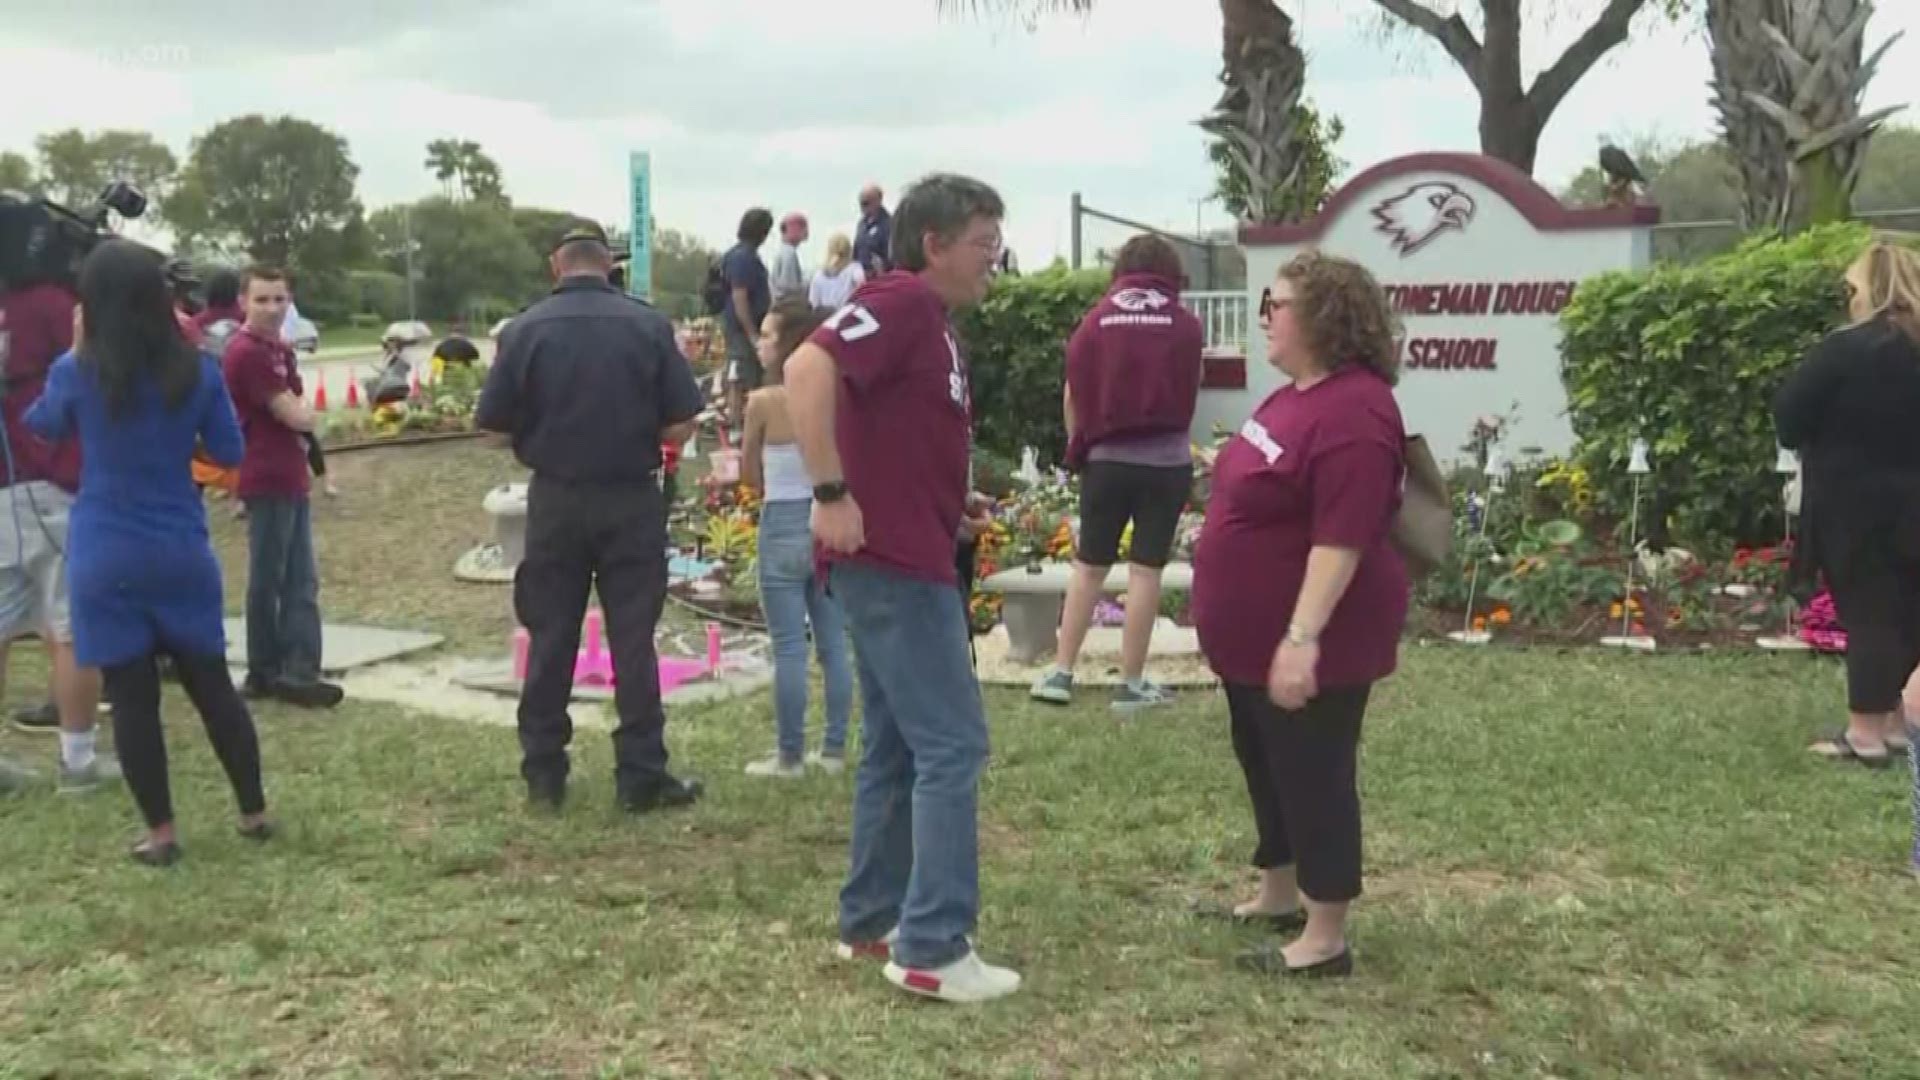 Feb. 14, 2019, marks one year since 17 lives were lost at the shooting at Marjory Stoneman Douglas High School in Parkland, Florida.